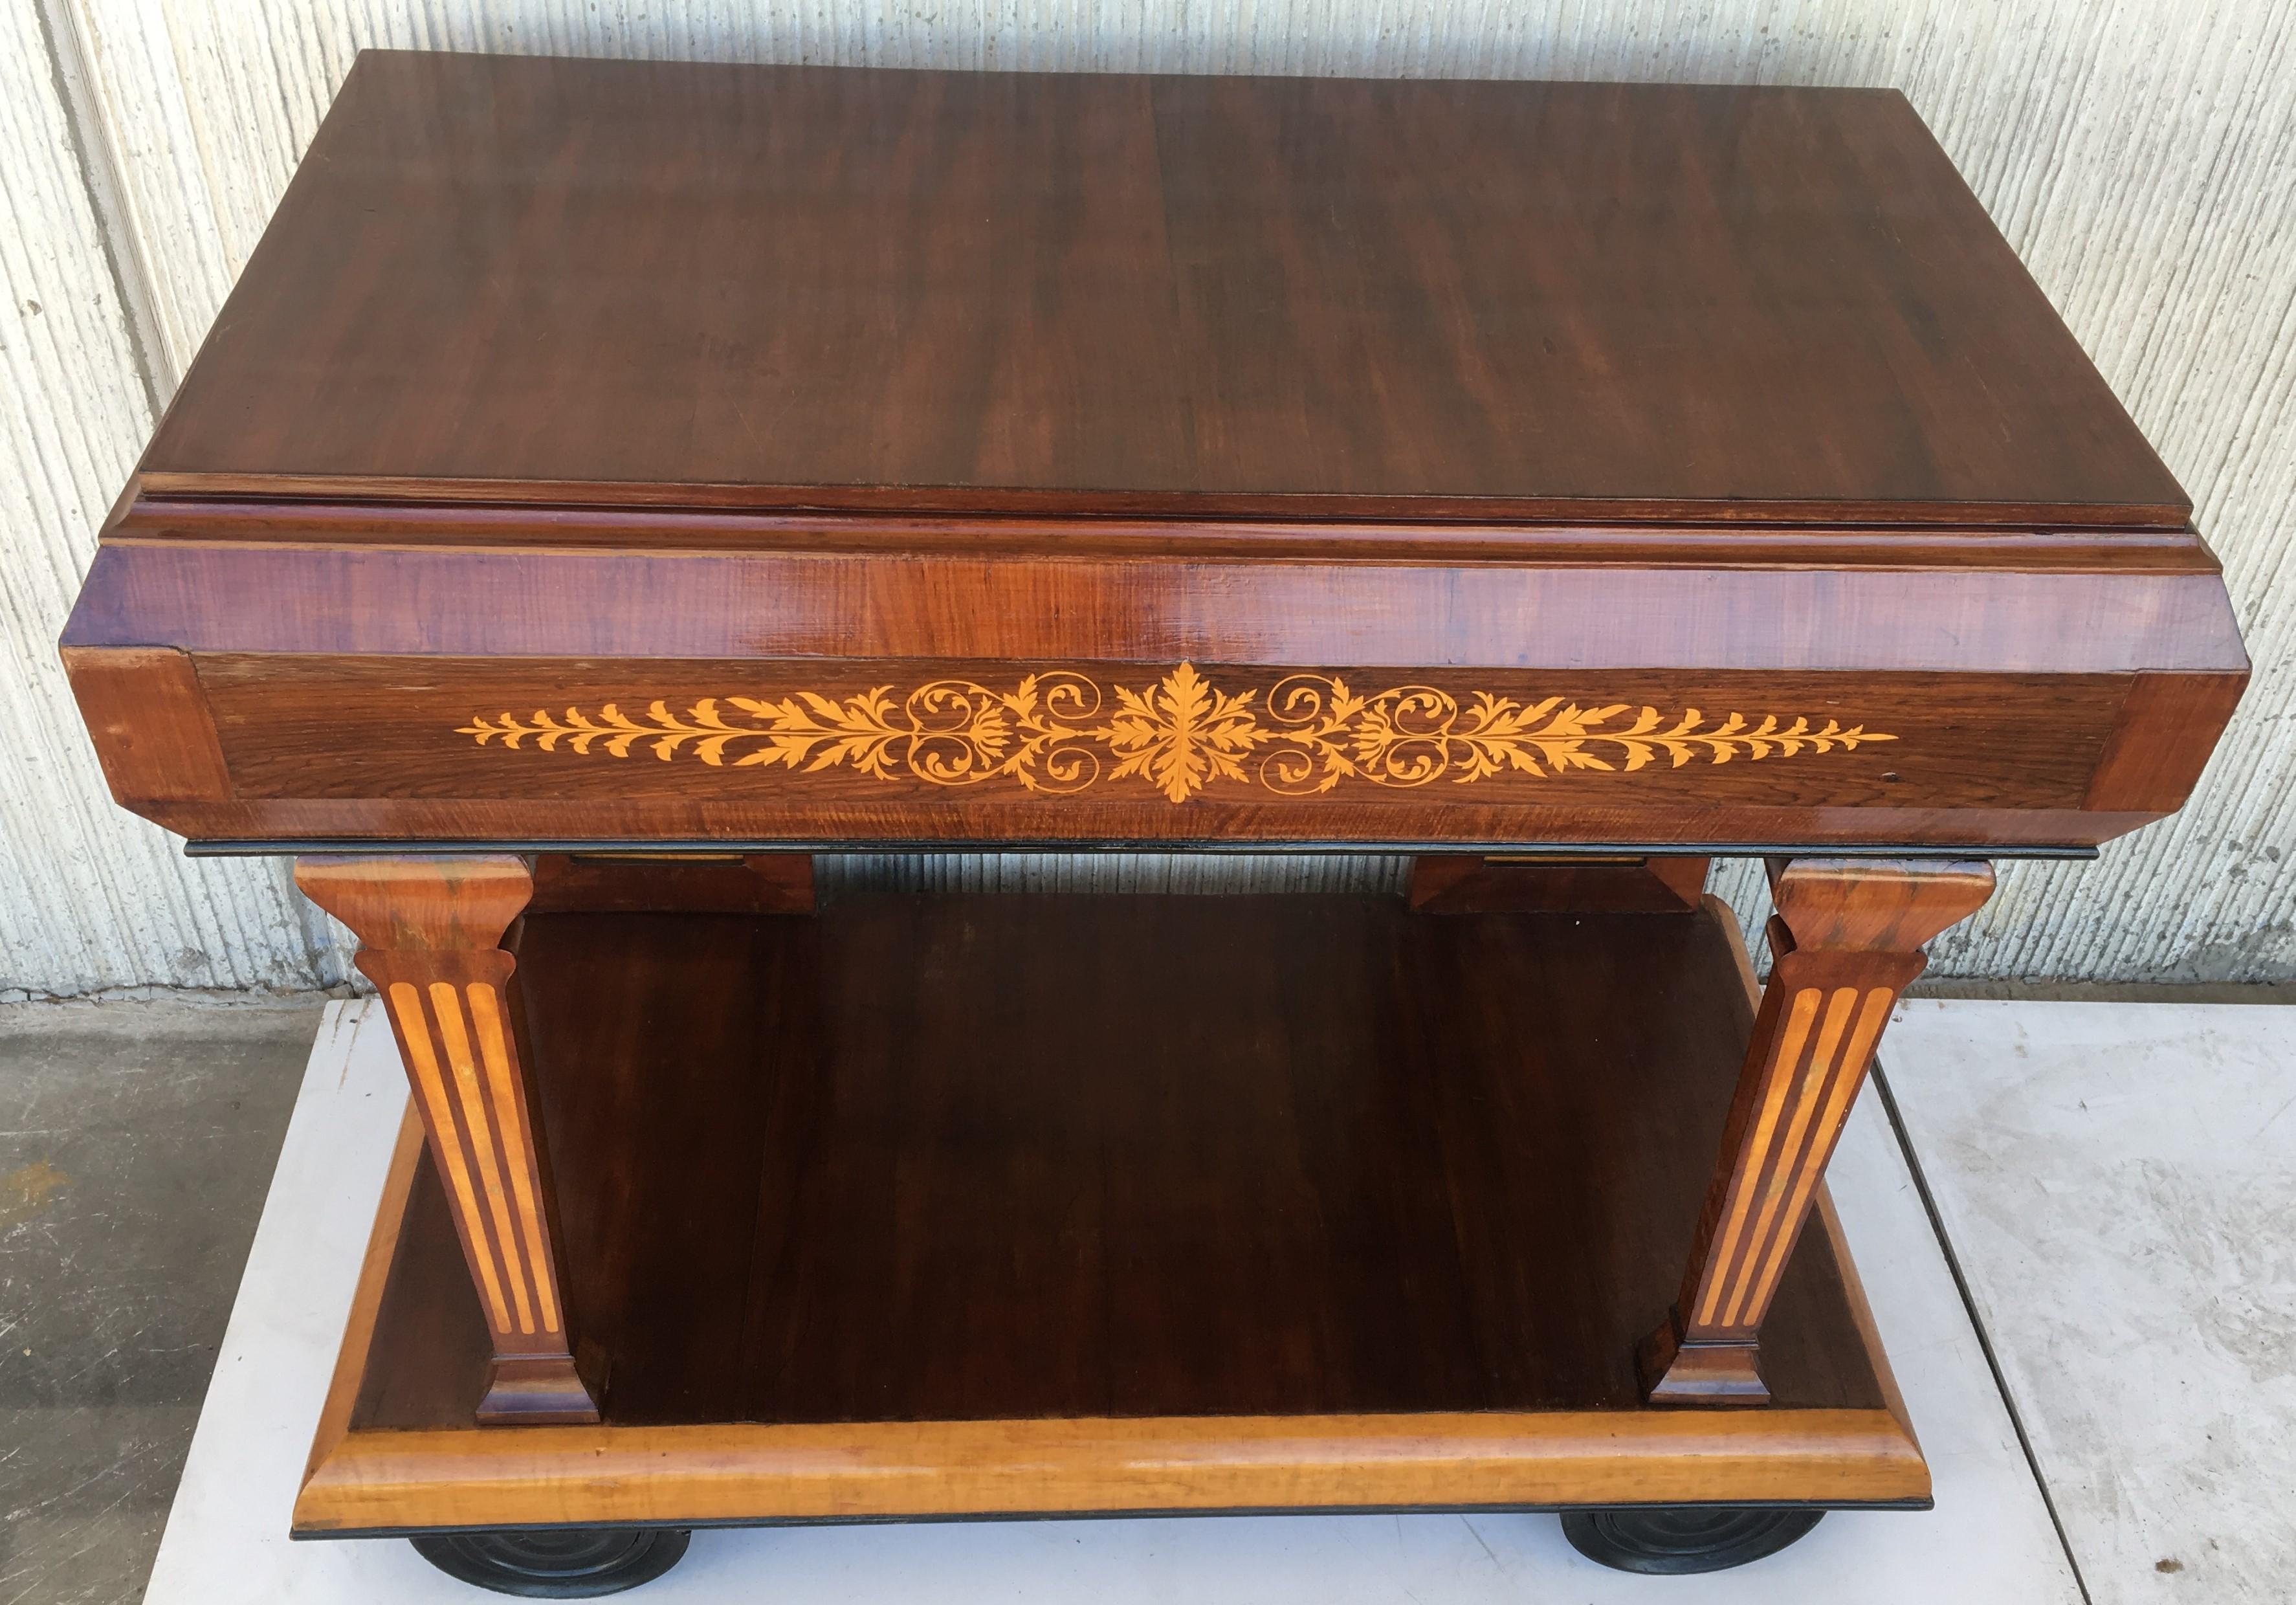 1830s French Empire Marquetry Console Table in Rosewood and Maple For Sale 9